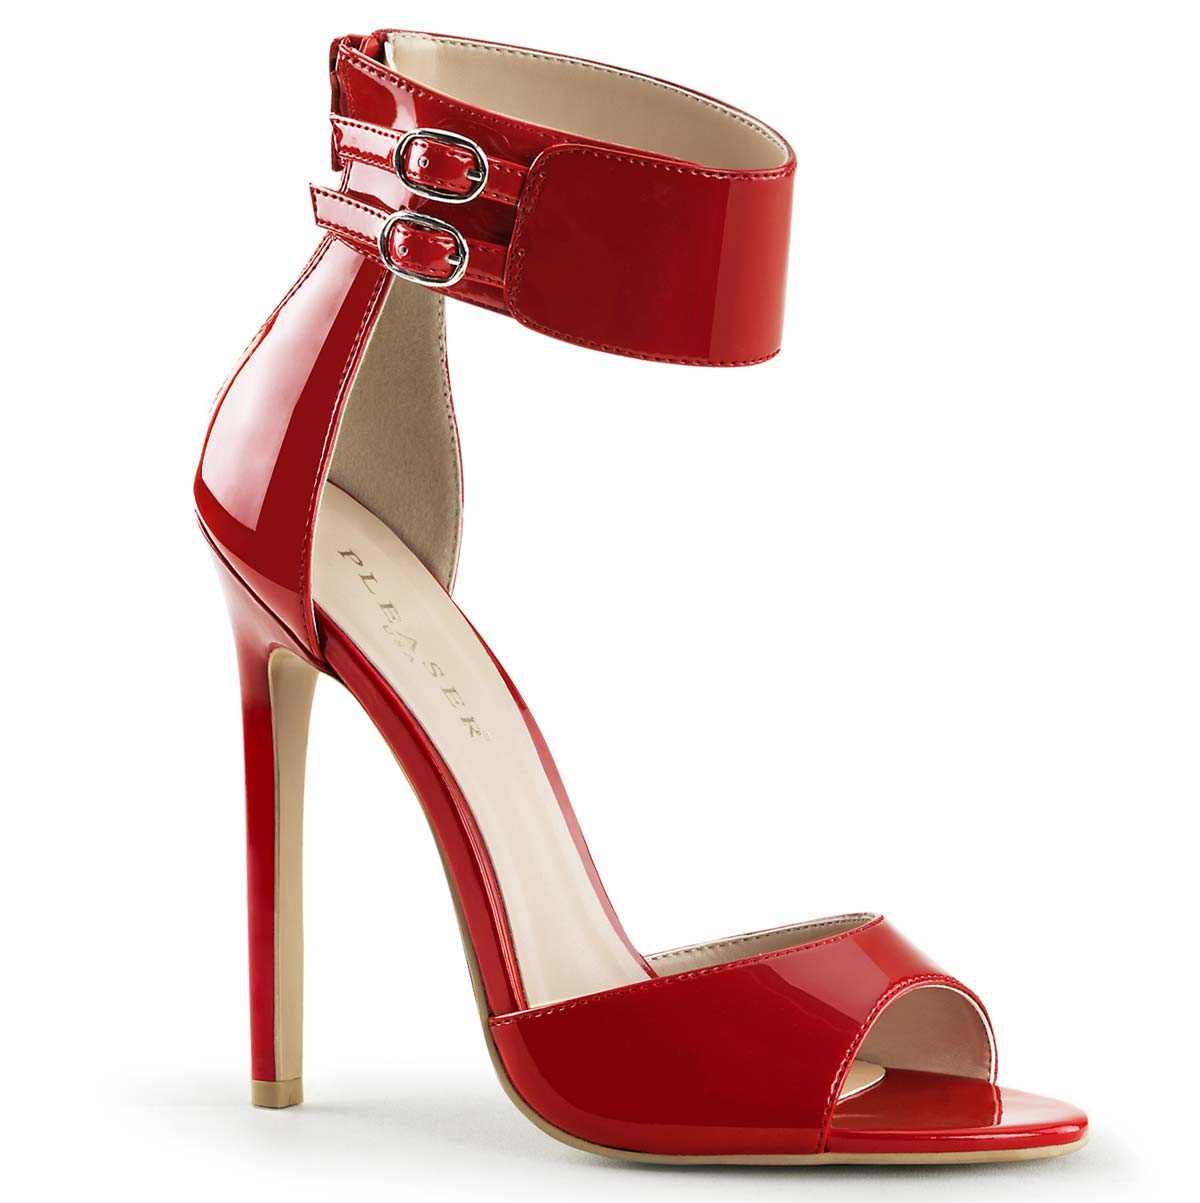 Pleaser SEXY-19 - Red Patent in Sexy Heels & Platforms - $57.95